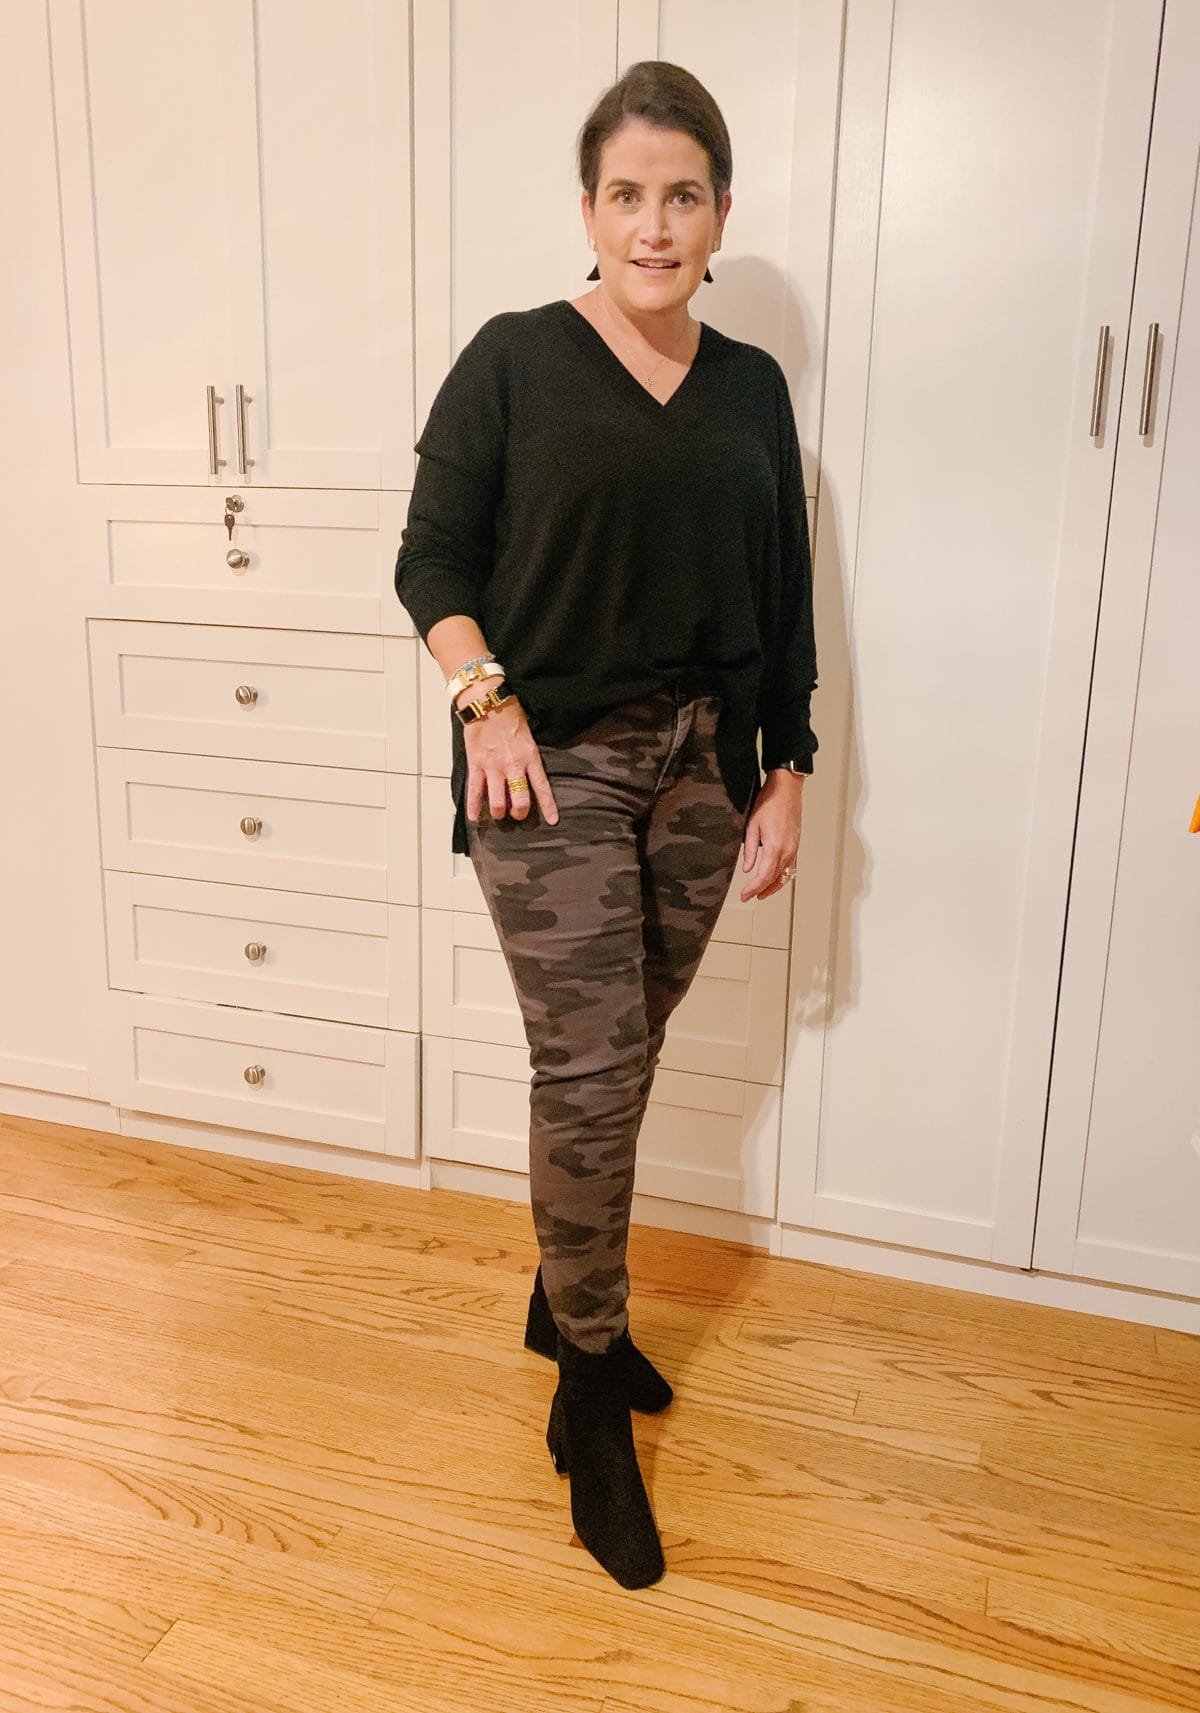 Nordstrom Sale, What Ali-Shaun Bought, Black V-Neck Sweater, Camo Pants, Booties